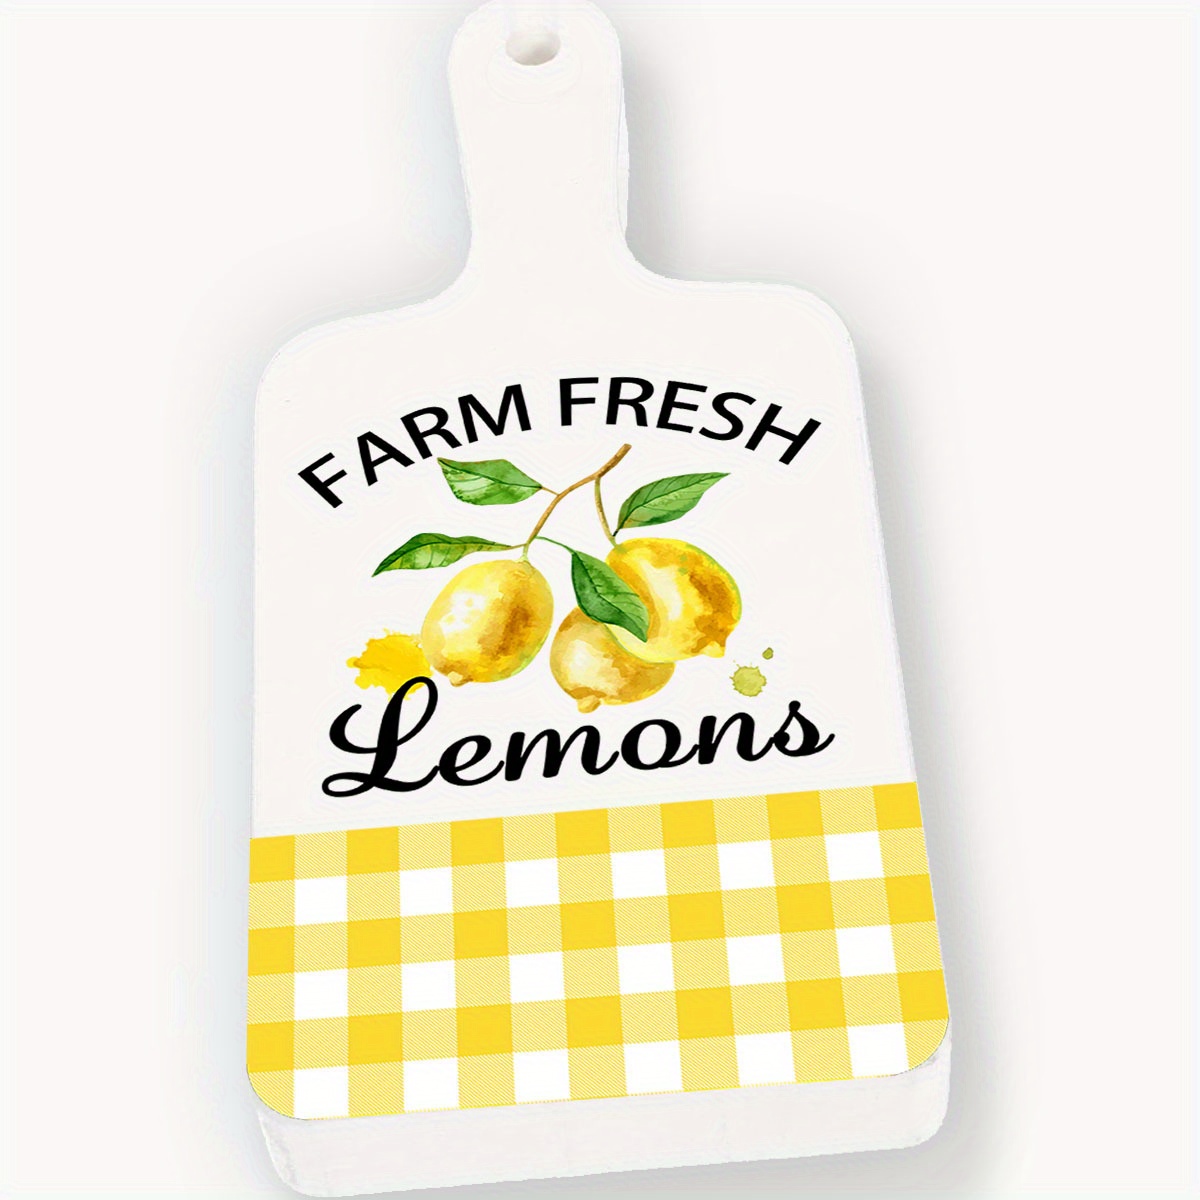 

1pc Wood Lemon Wall Decor - Lemon Decorations Wooden Sign - Wooden Sign Wall Art Decor For Home, Kitchen, Tabletop, Farmhouse Living Room